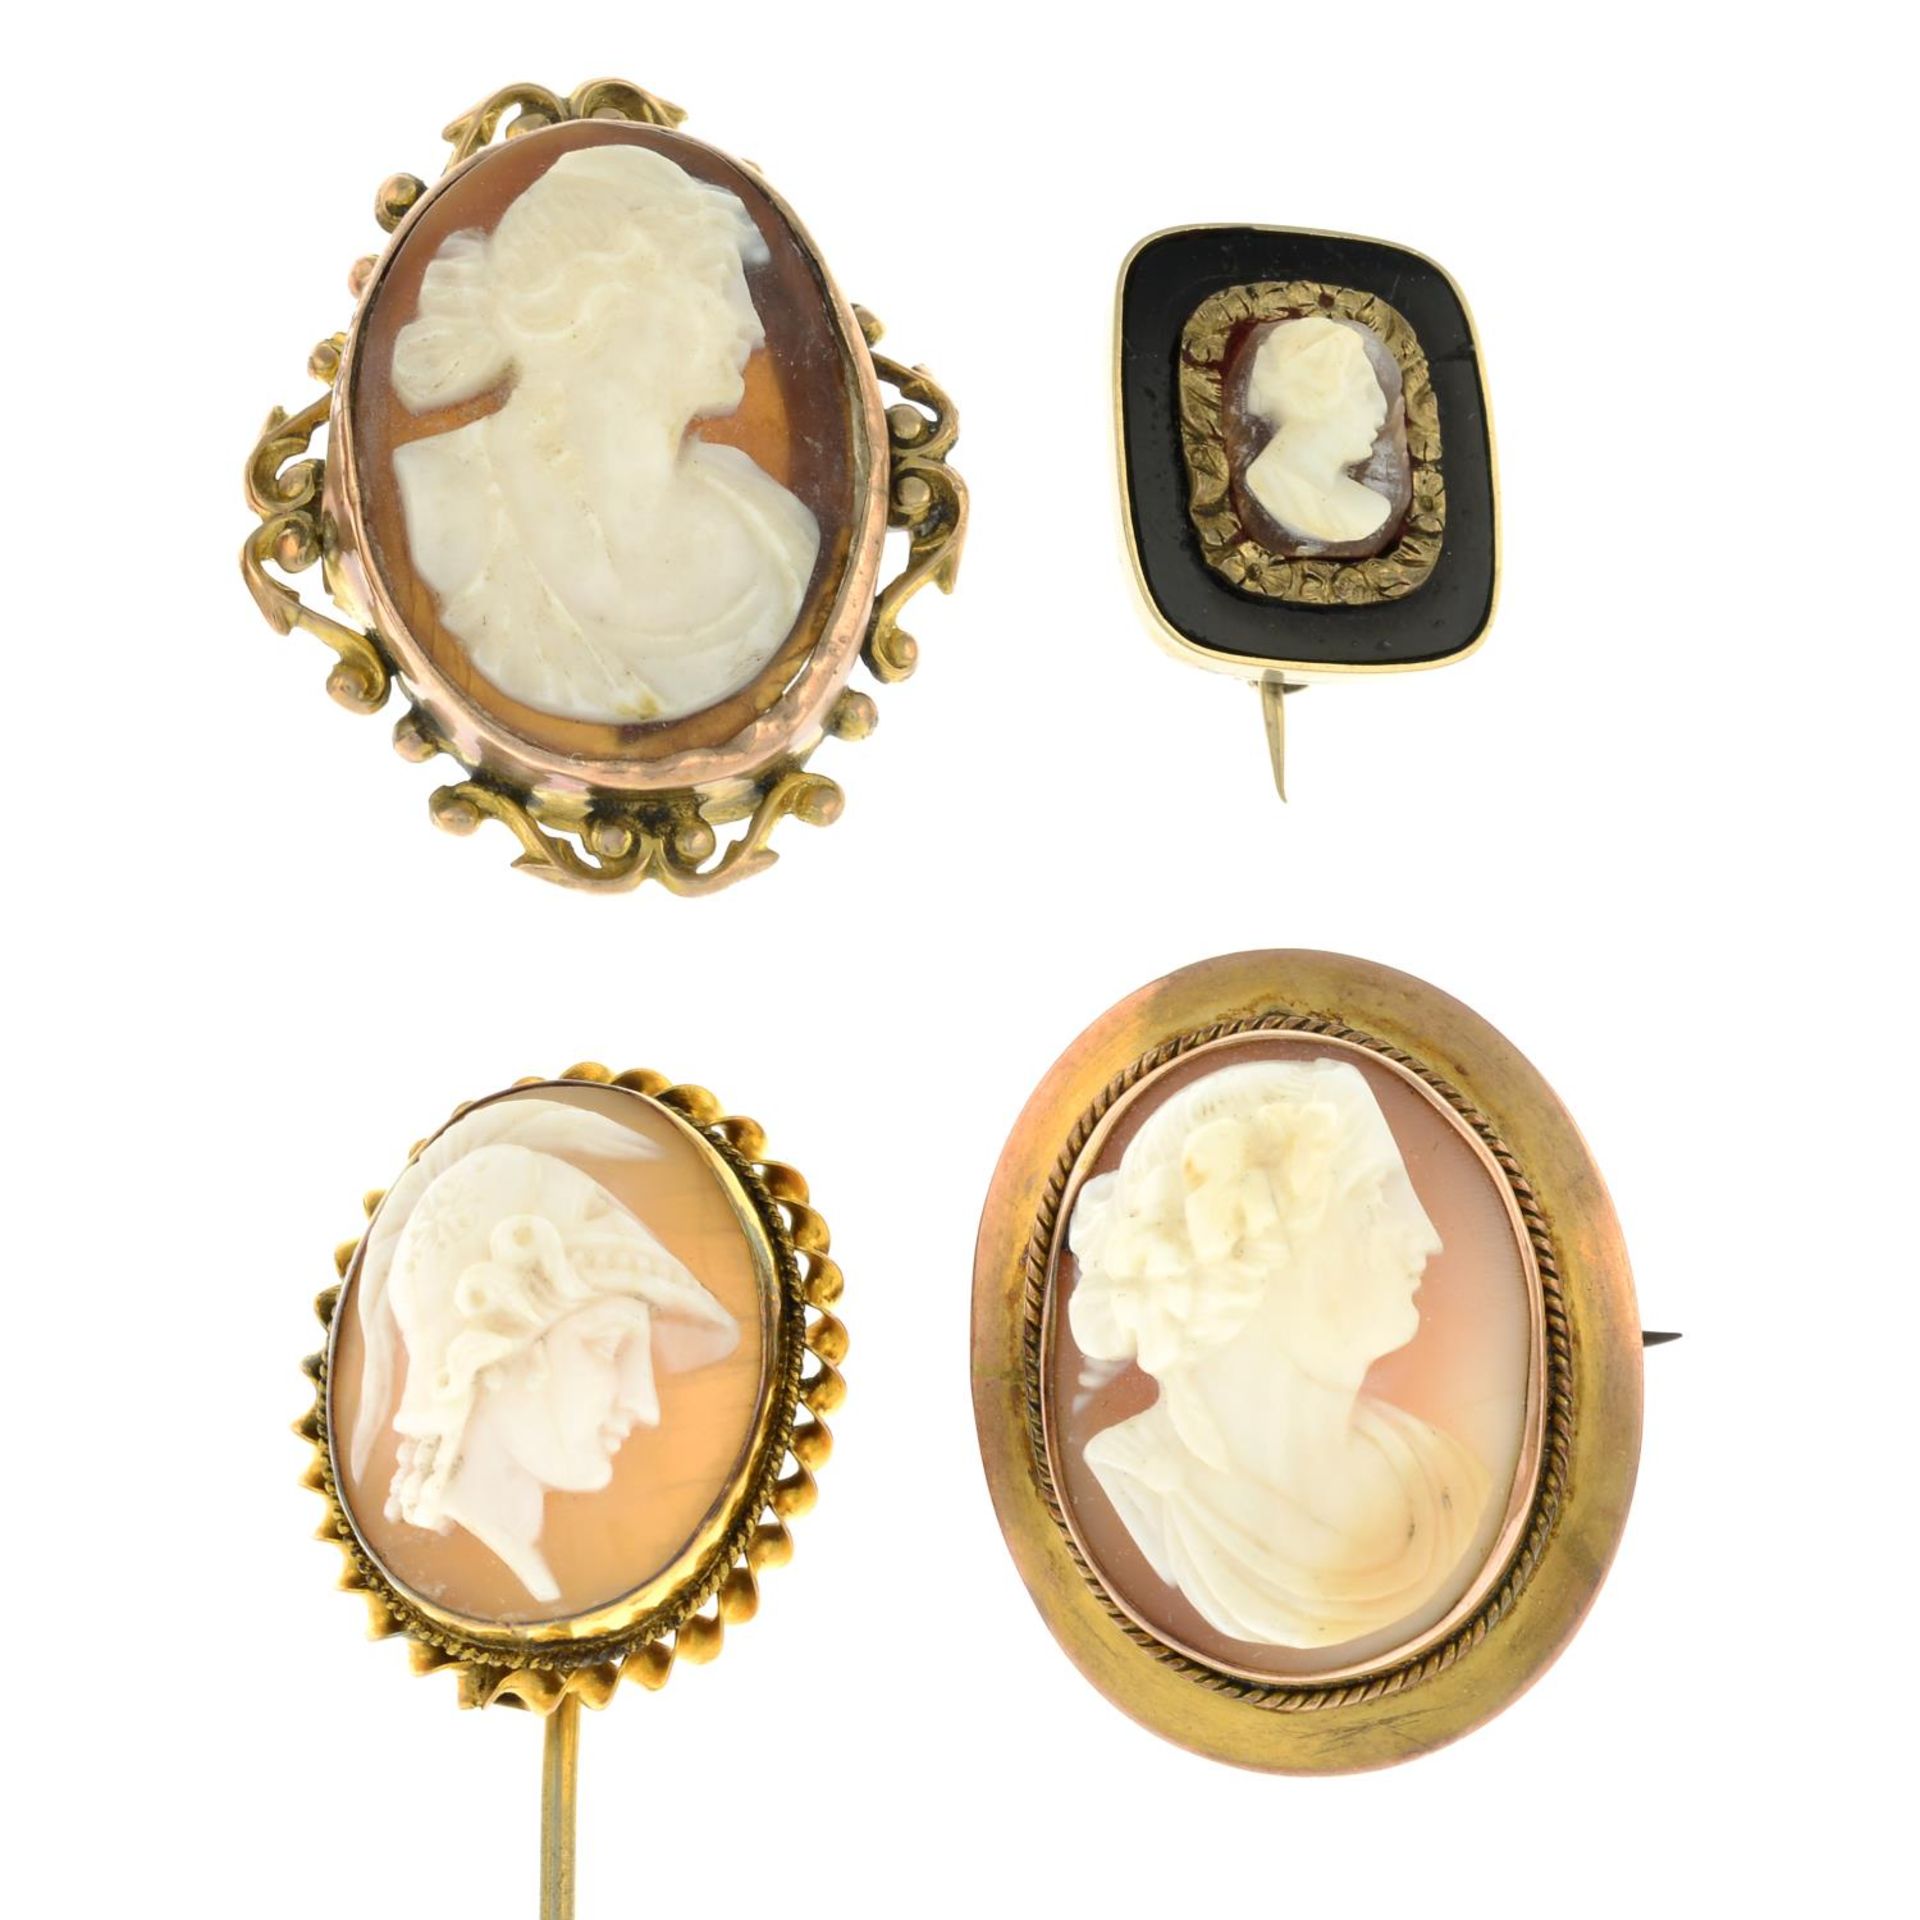 Three shell cameo brooches and a stickpin.